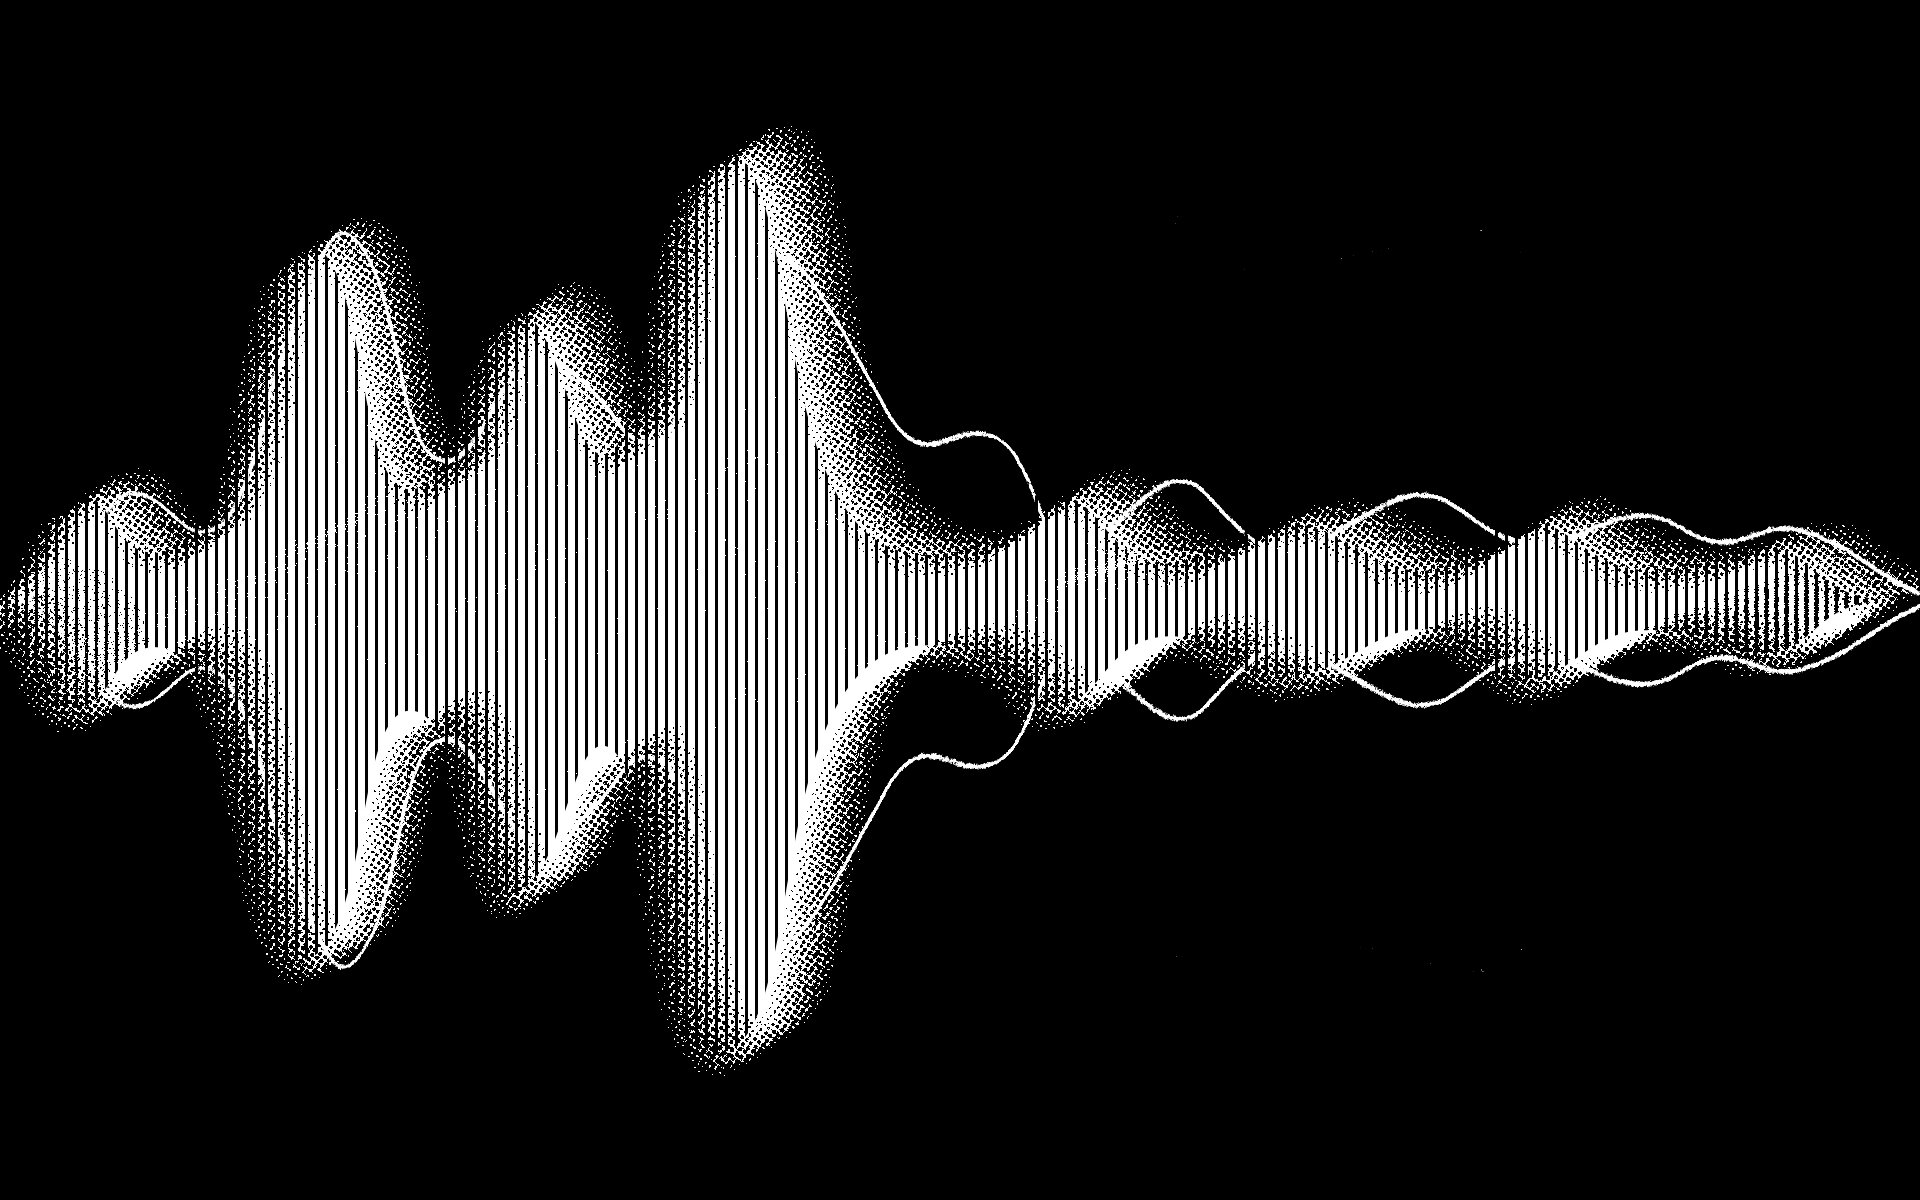 Pink Noise VS White Noise - What's The Difference? – Acoustic Fields